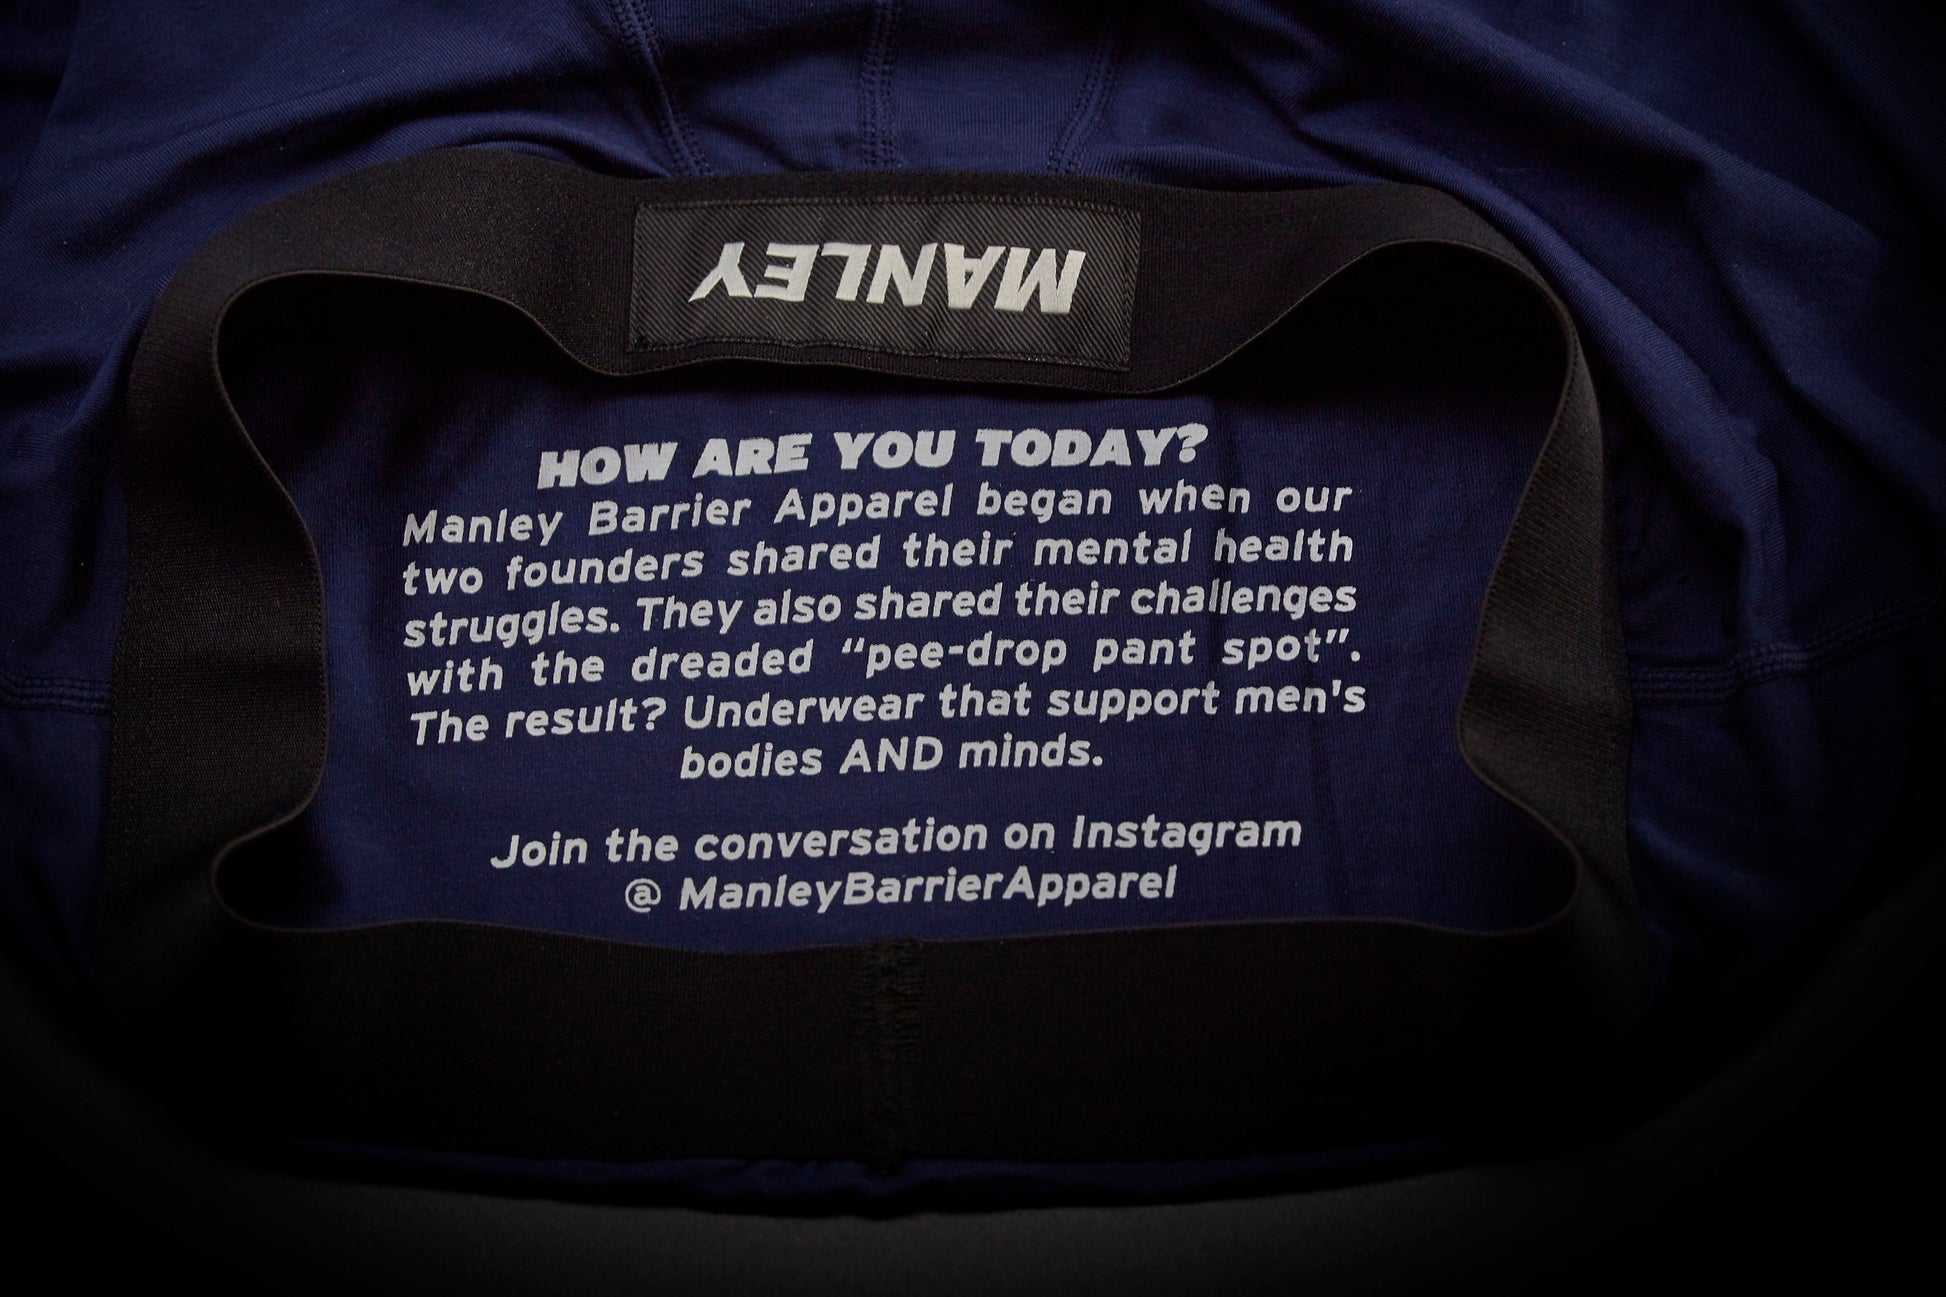 Text on the inside back panel of Manley boxer briefs. Reads: How are you today? Manley Barrier Apparel began when our two founders shared their mental health struggles. They also shared their challenges with the dreaded pee-drop pant spot. The result? Underwear that supports men's bodies and minds. Join the conversation on Instagram @Manley Barrier Apparel. 